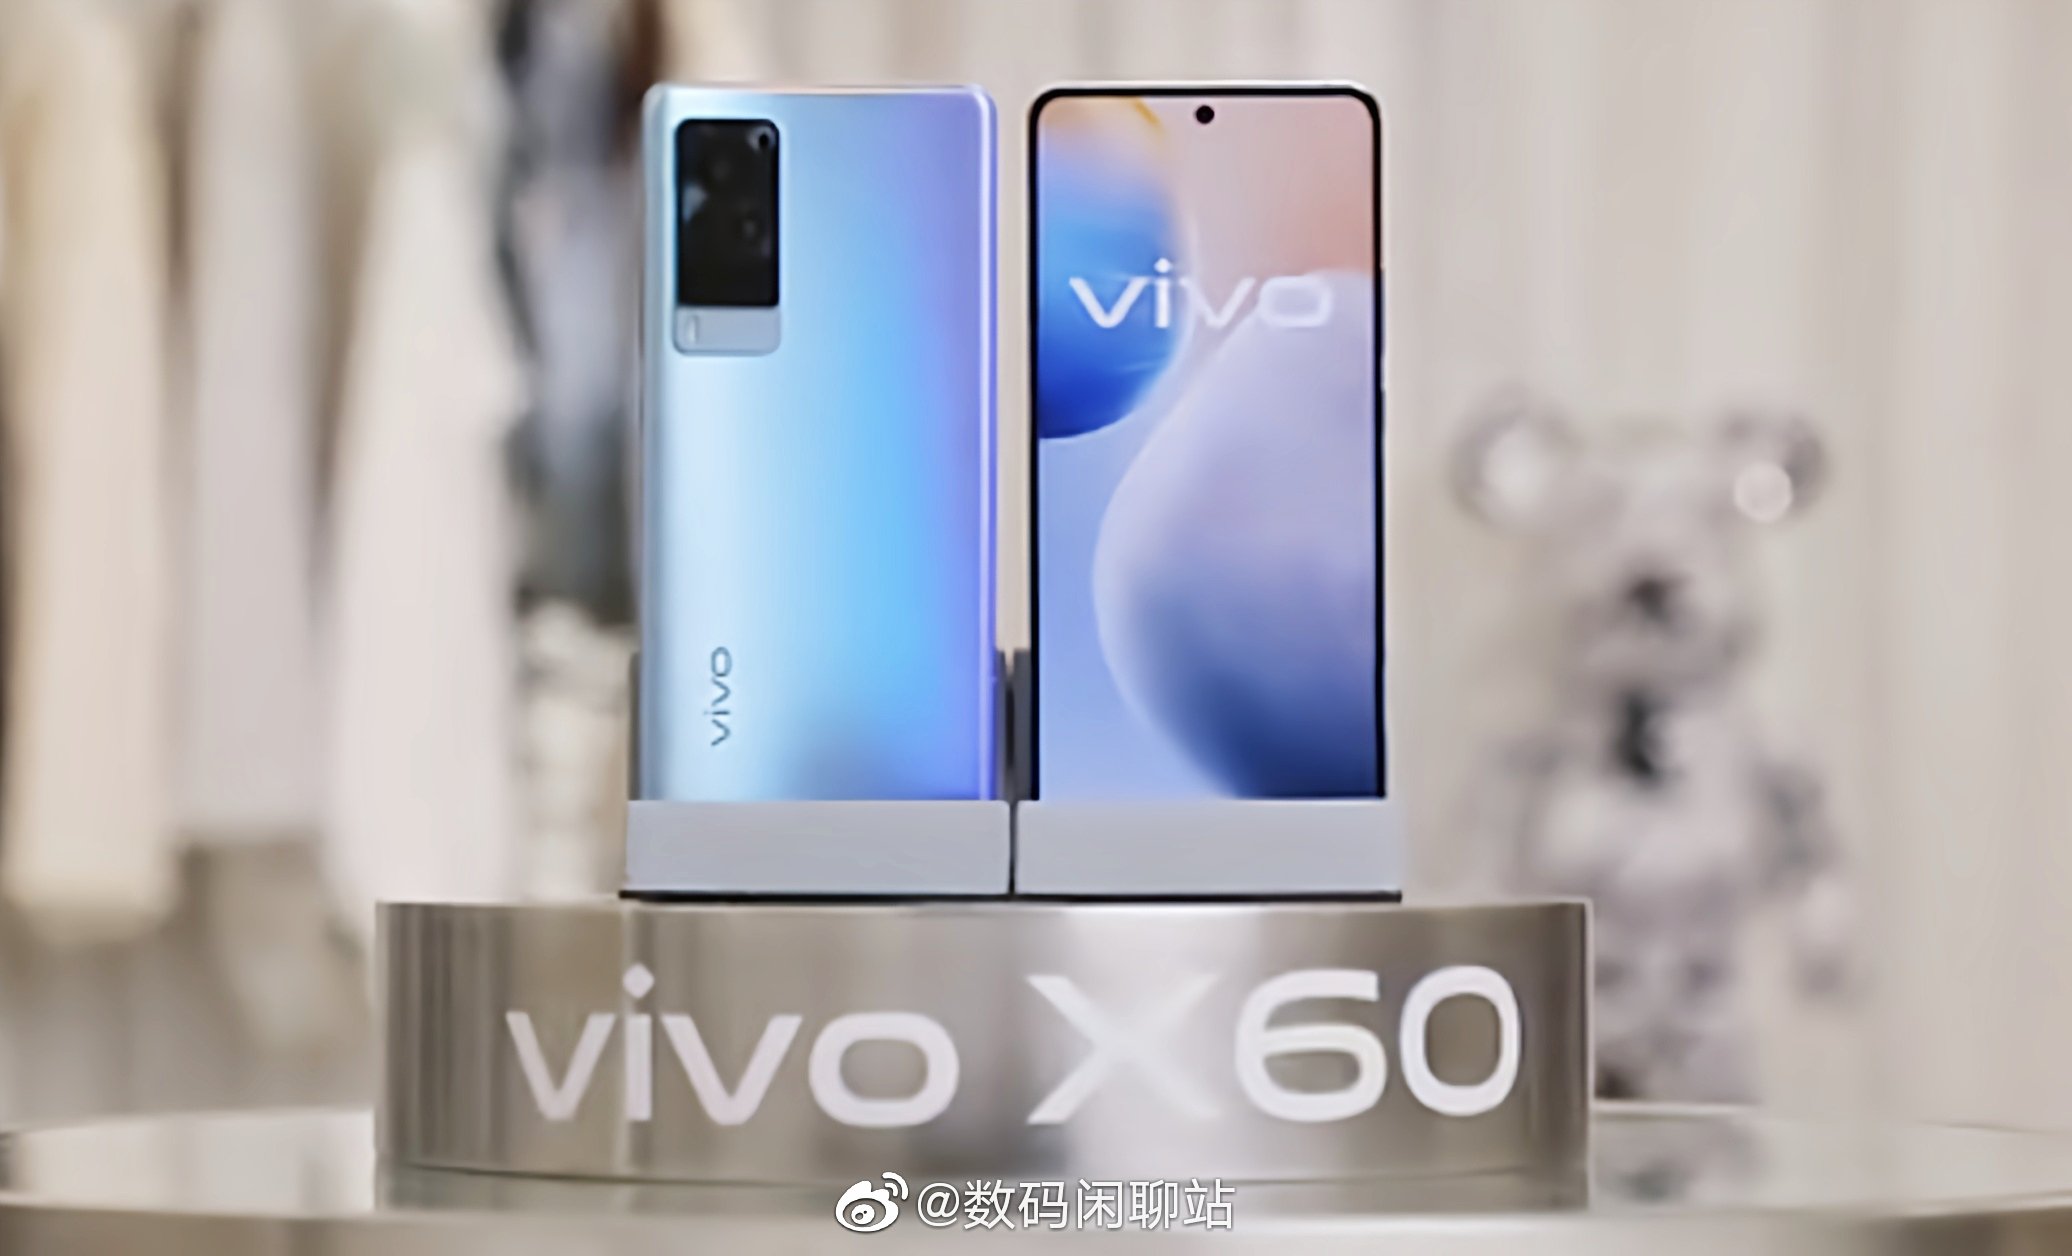 Vivo X60 confirmed to be powered by Samsung Exynos 1080 chipset